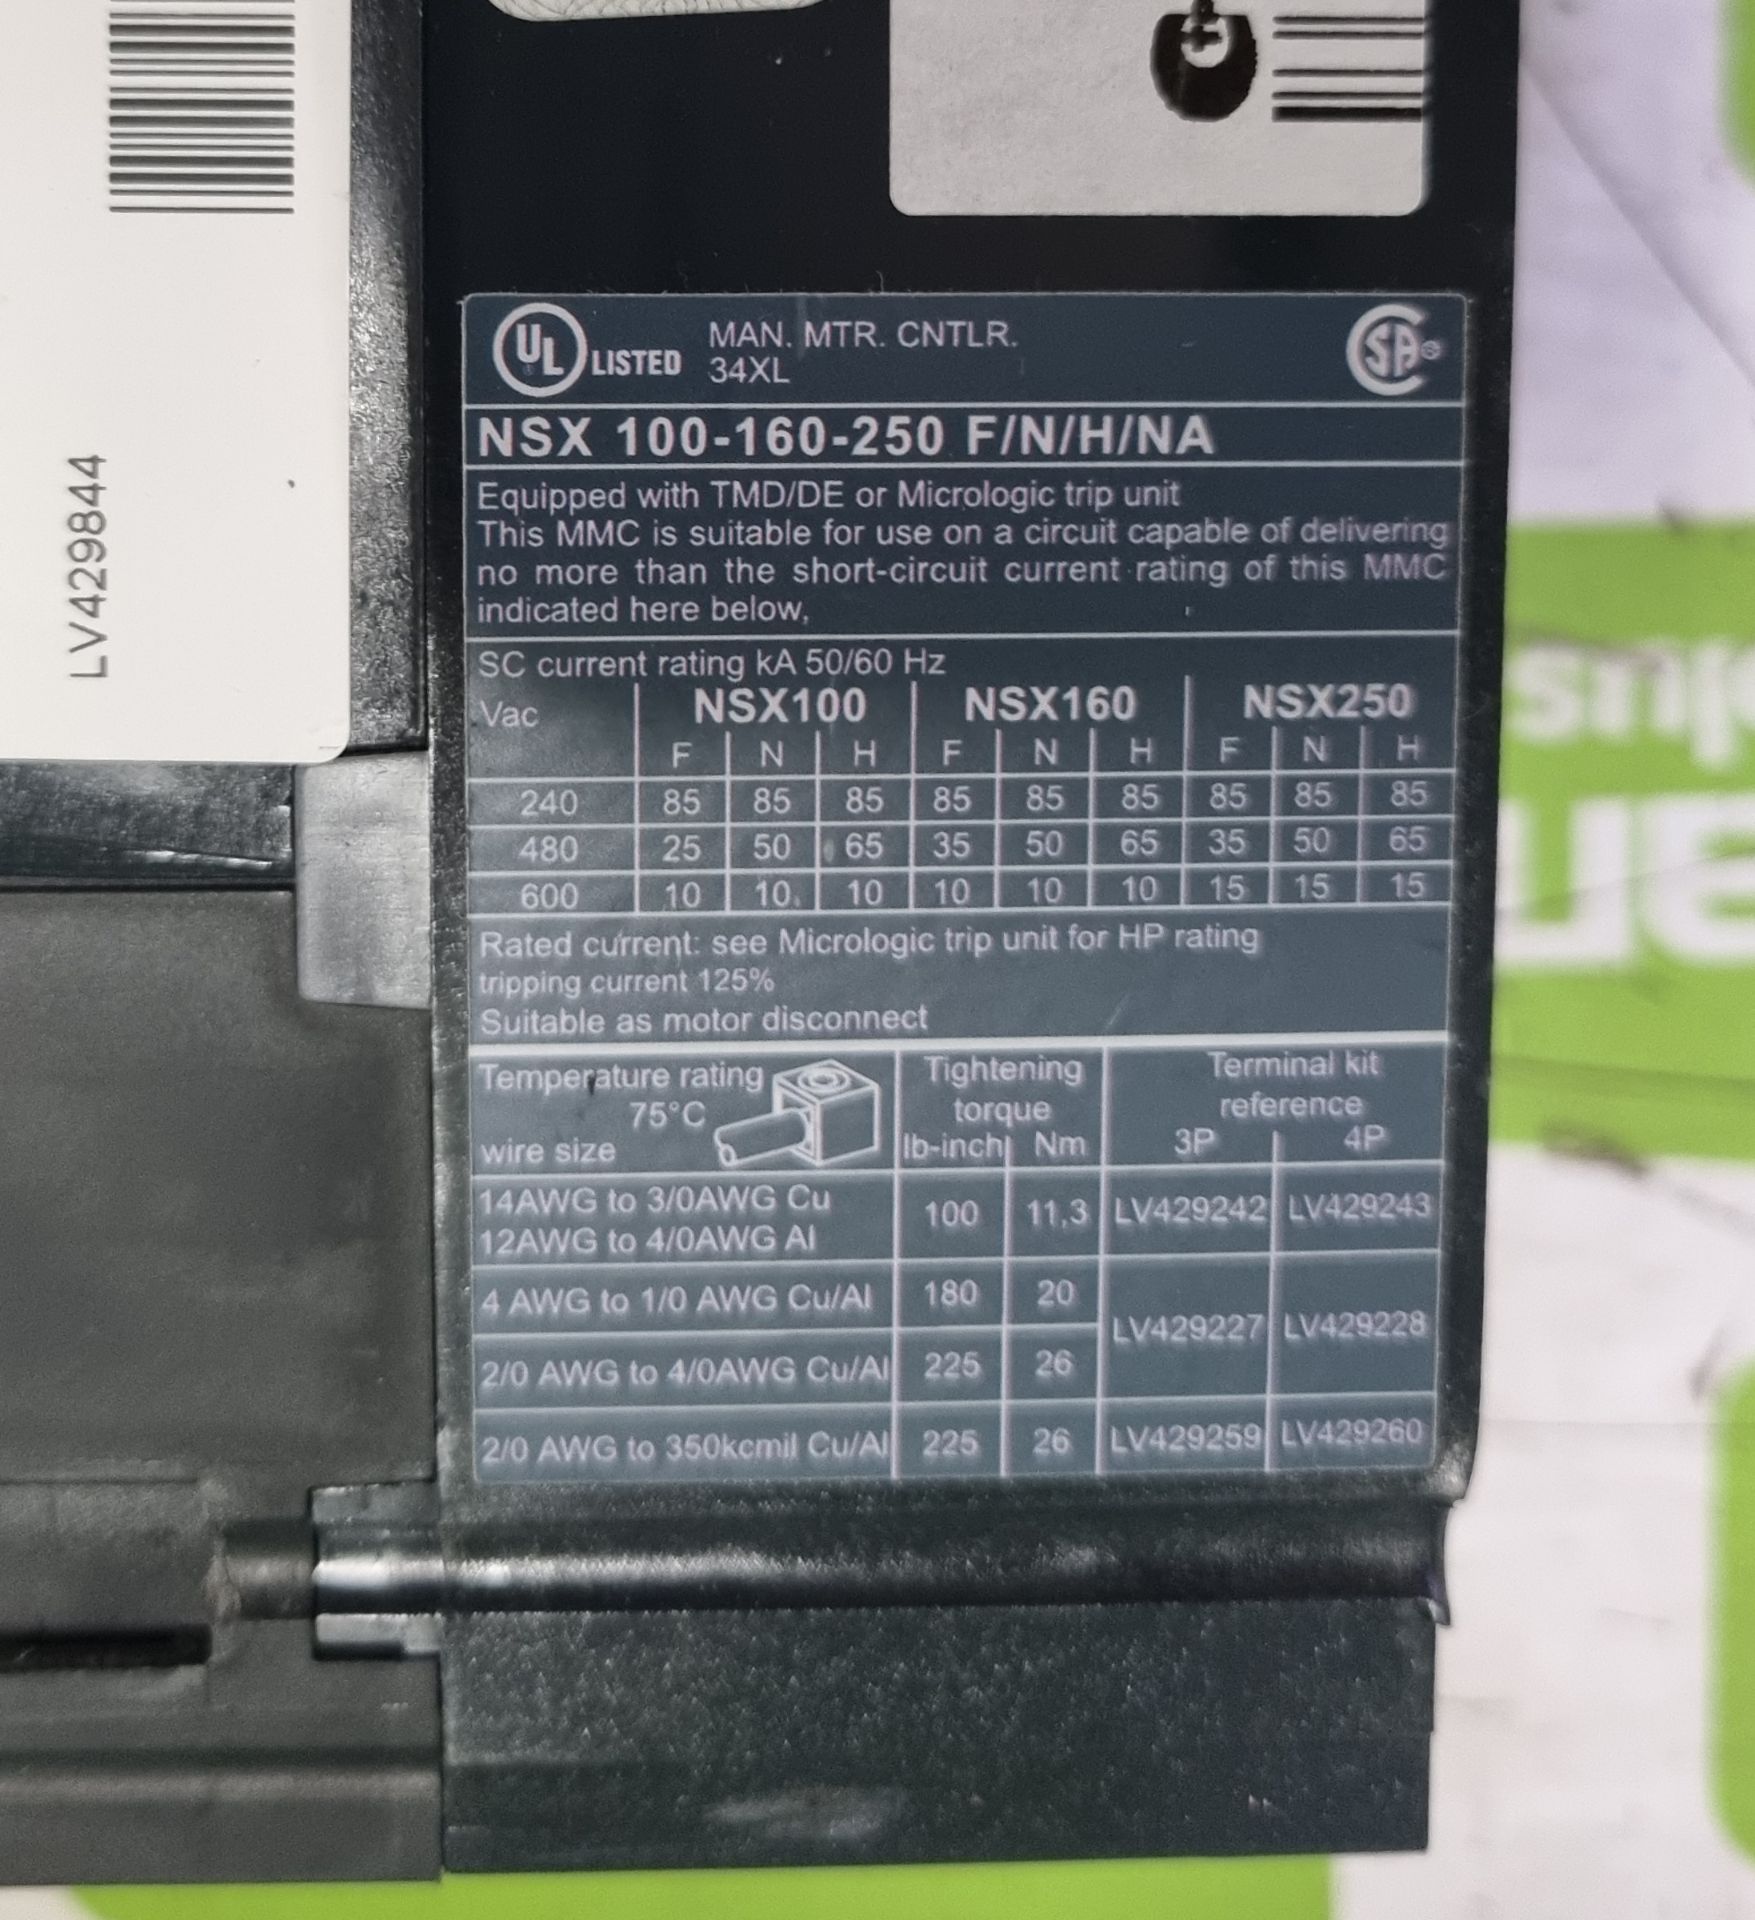 Schneider Electric MGP0403XN Powerpact 4 molded case circuit breaker - 3 phase - 415V - 40A - Image 4 of 5